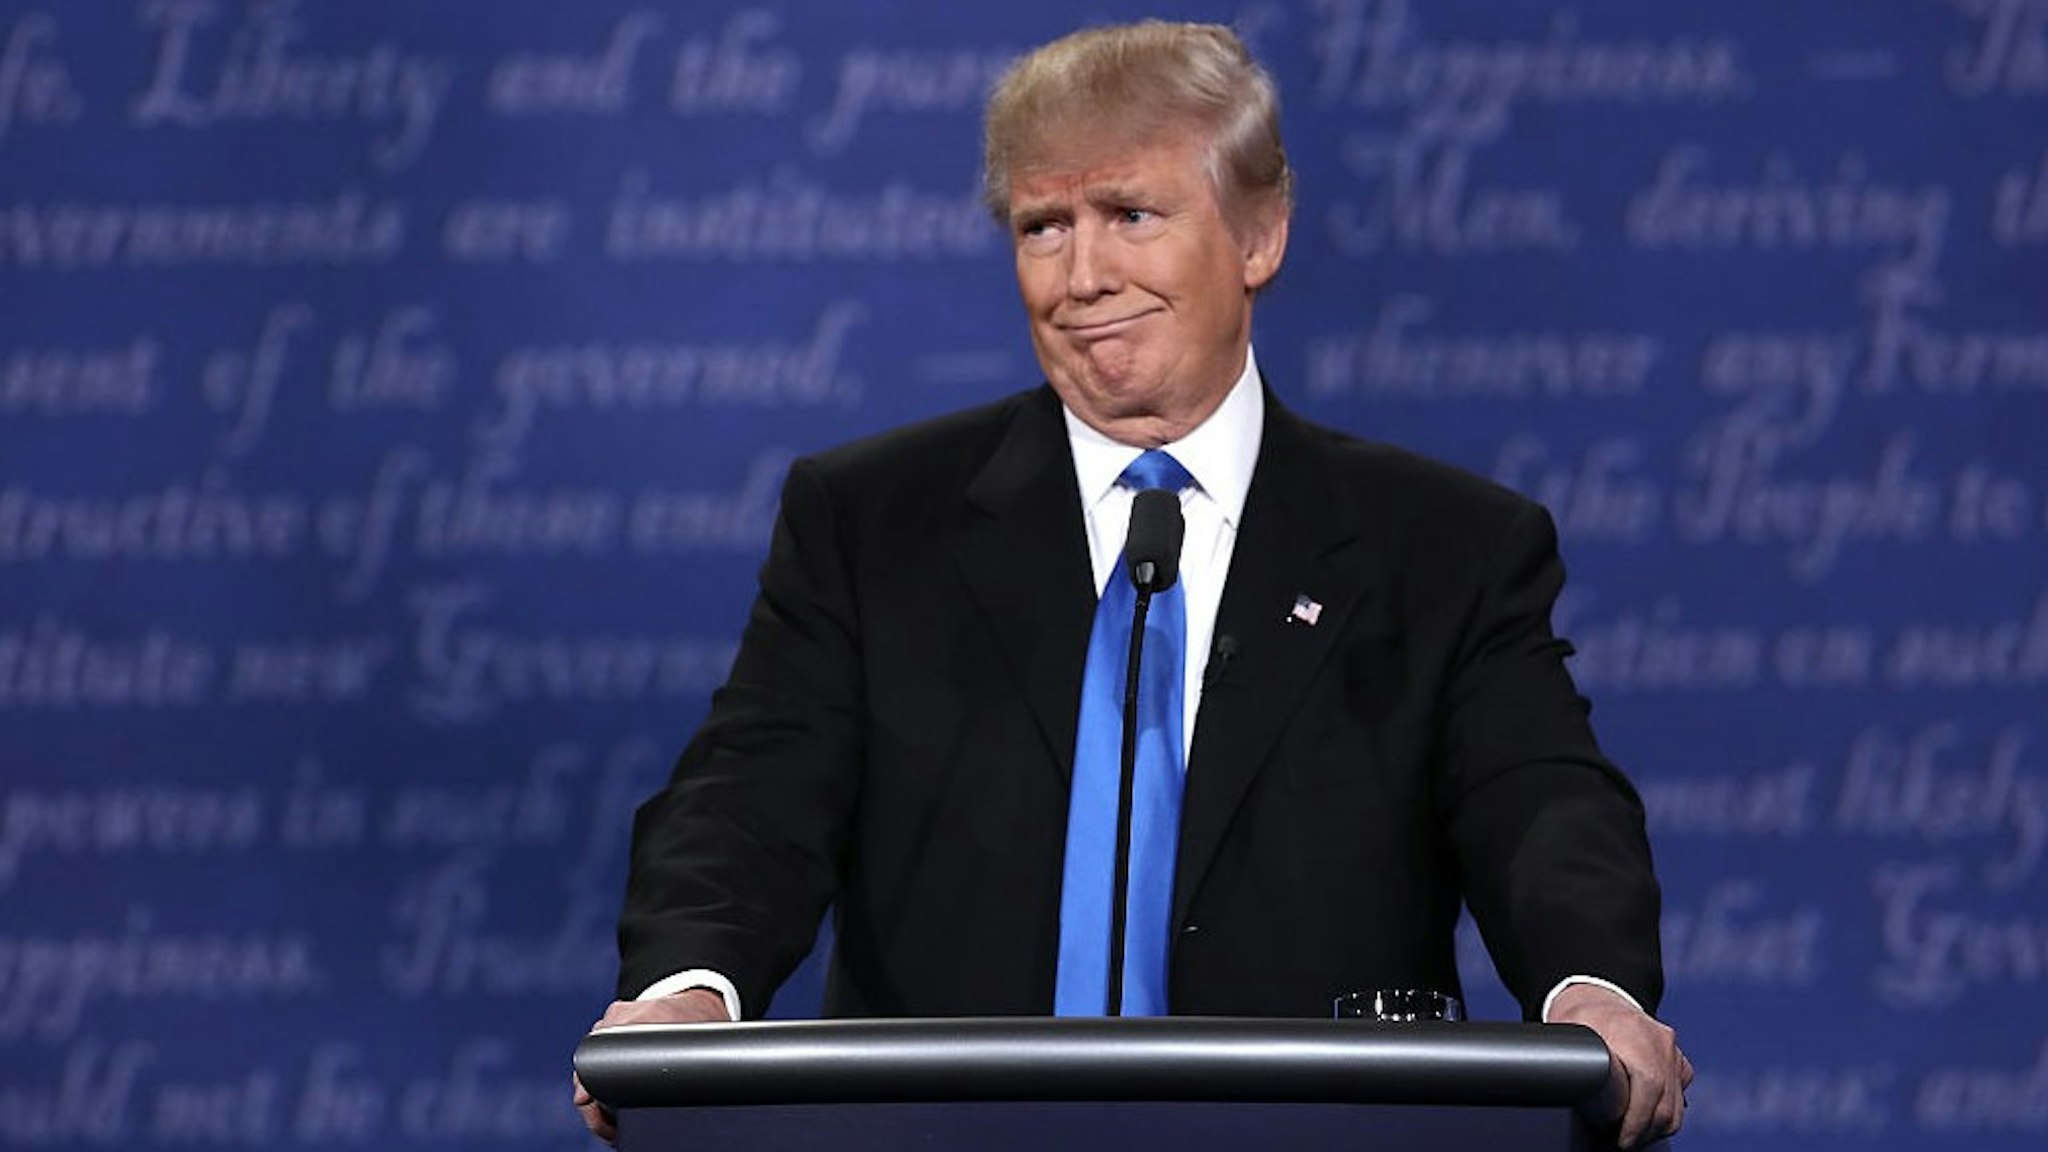 HEMPSTEAD, NY - SEPTEMBER 26: Republican presidential nominee Donald Trump makes a face during the Presidential Debate at Hofstra University on September 26, 2016 in Hempstead, New York. The first of four debates for the 2016 Election, three Presidential and one Vice Presidential, is moderated by NBC's Lester Holt. (Photo by